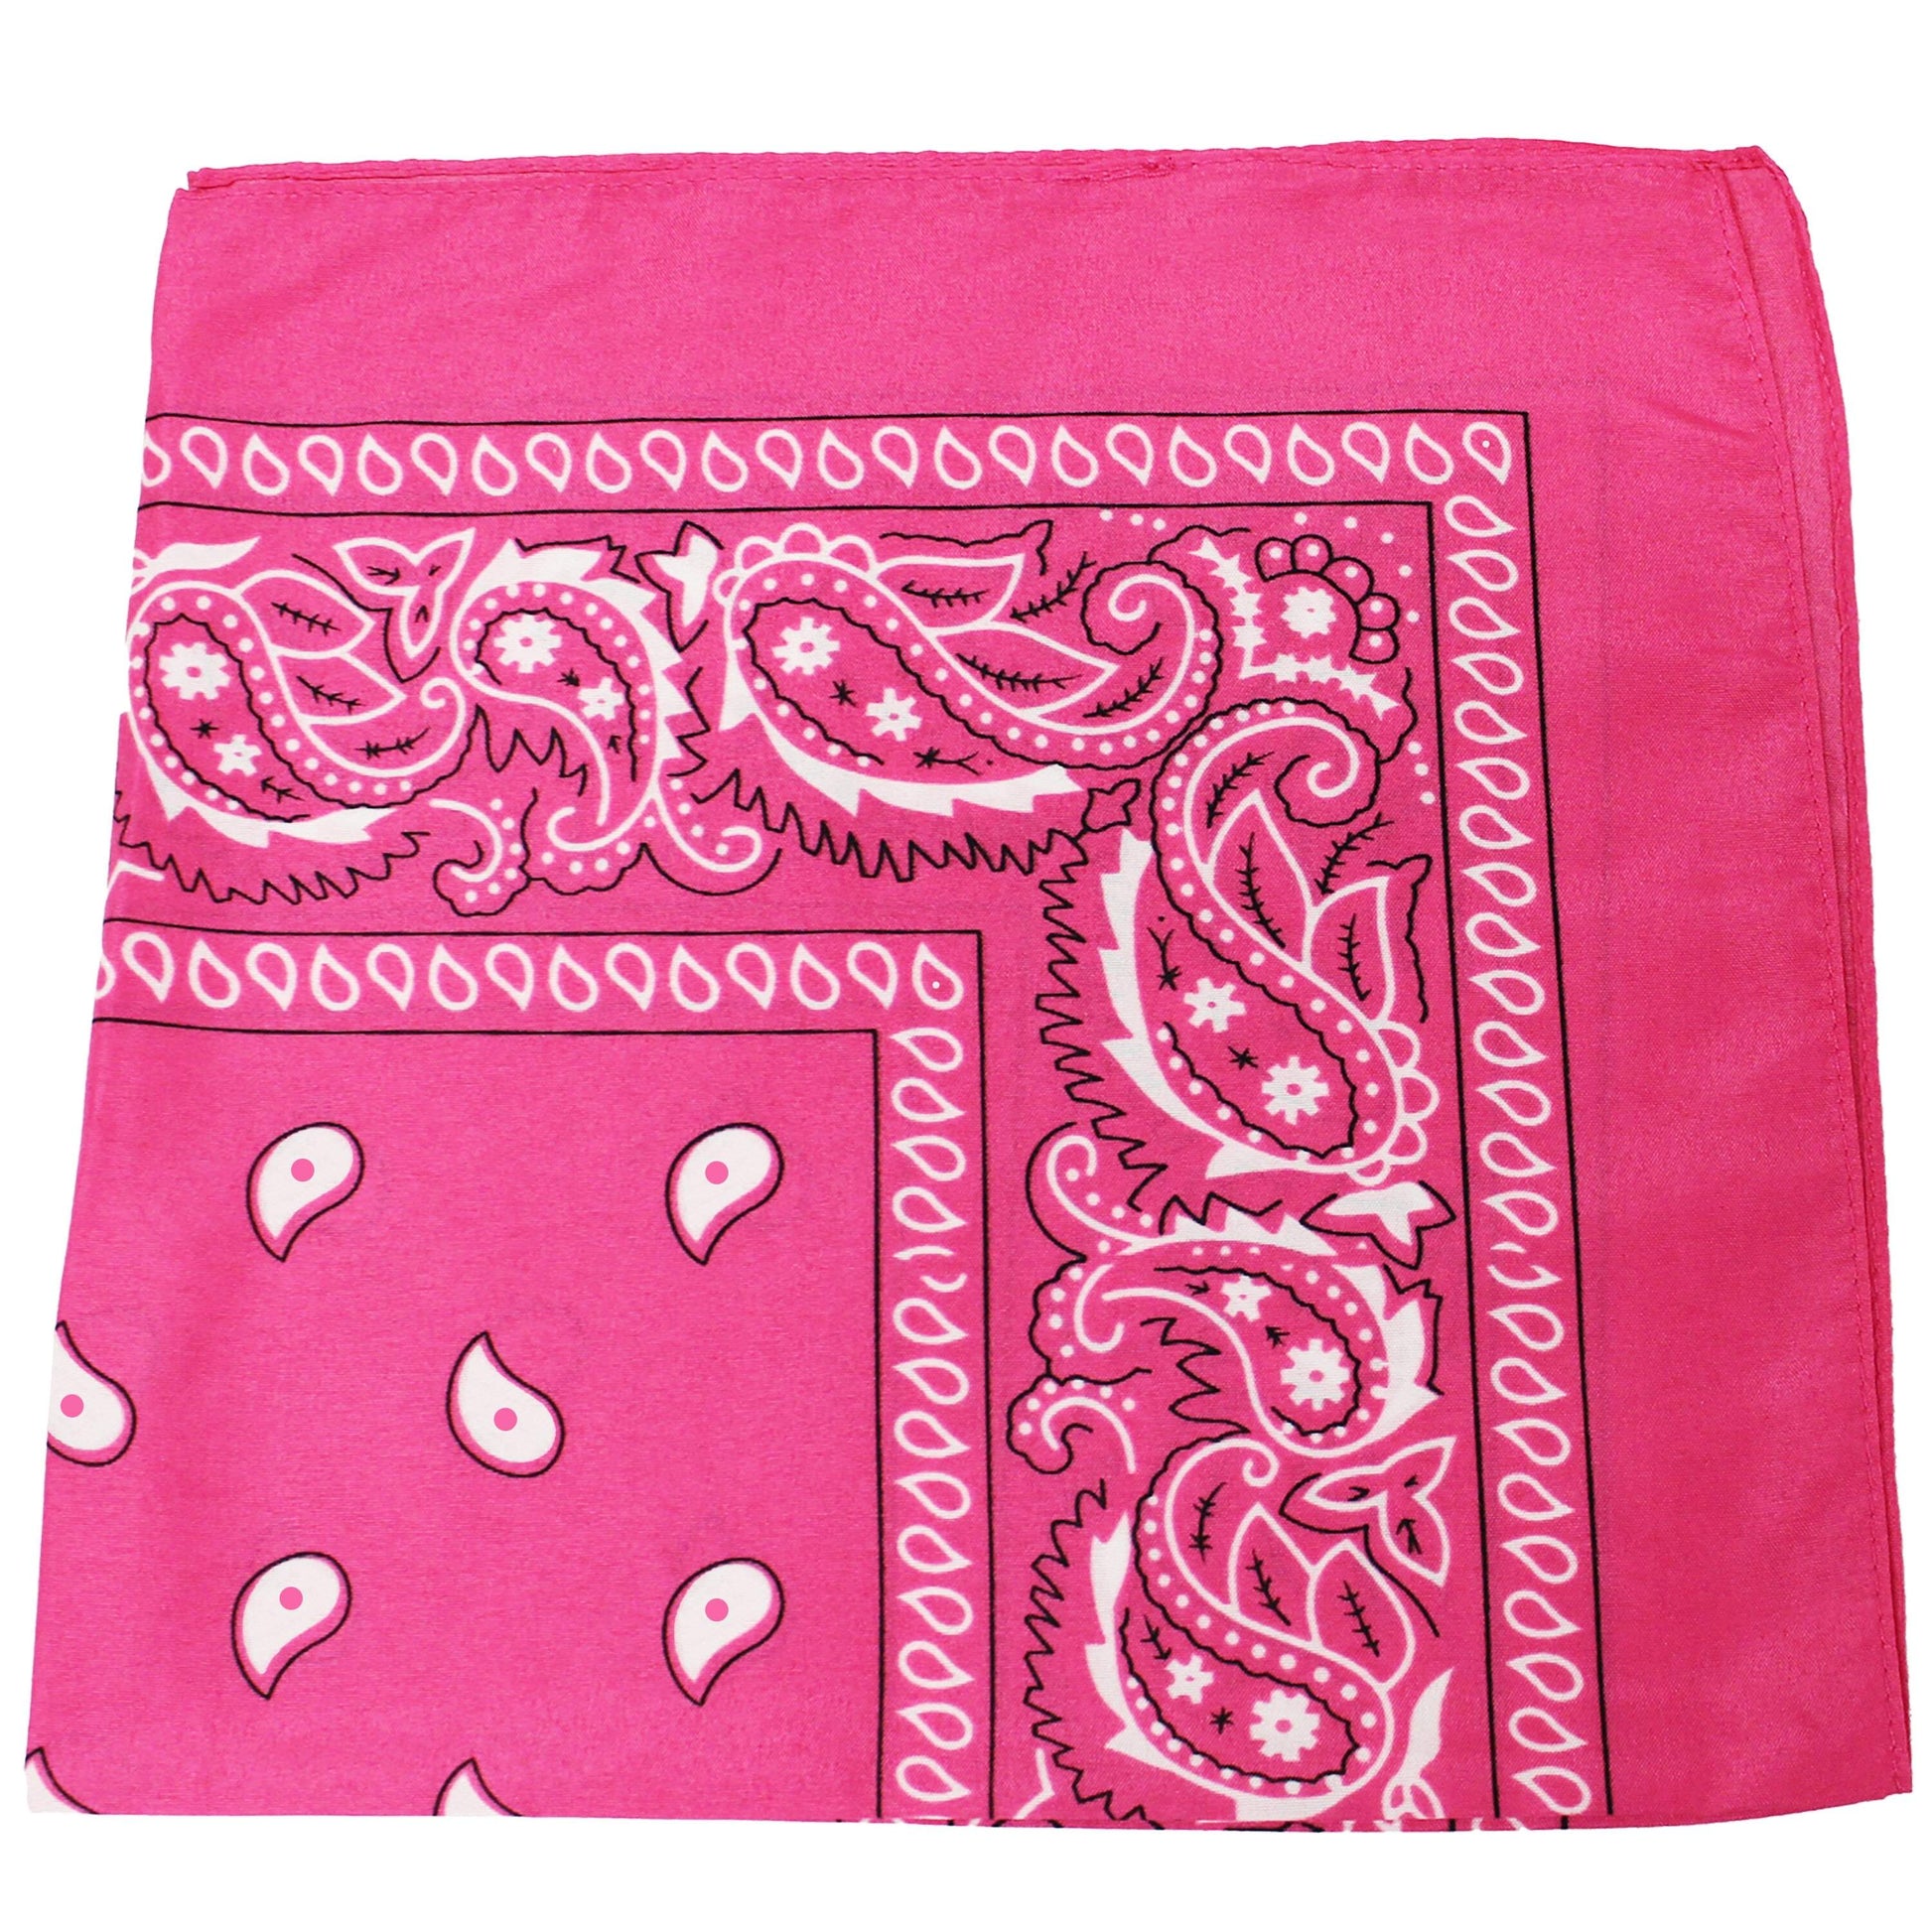 Pack of 6 X-Large Paisley Cotton Printed Bandana - 27 x 27 inches